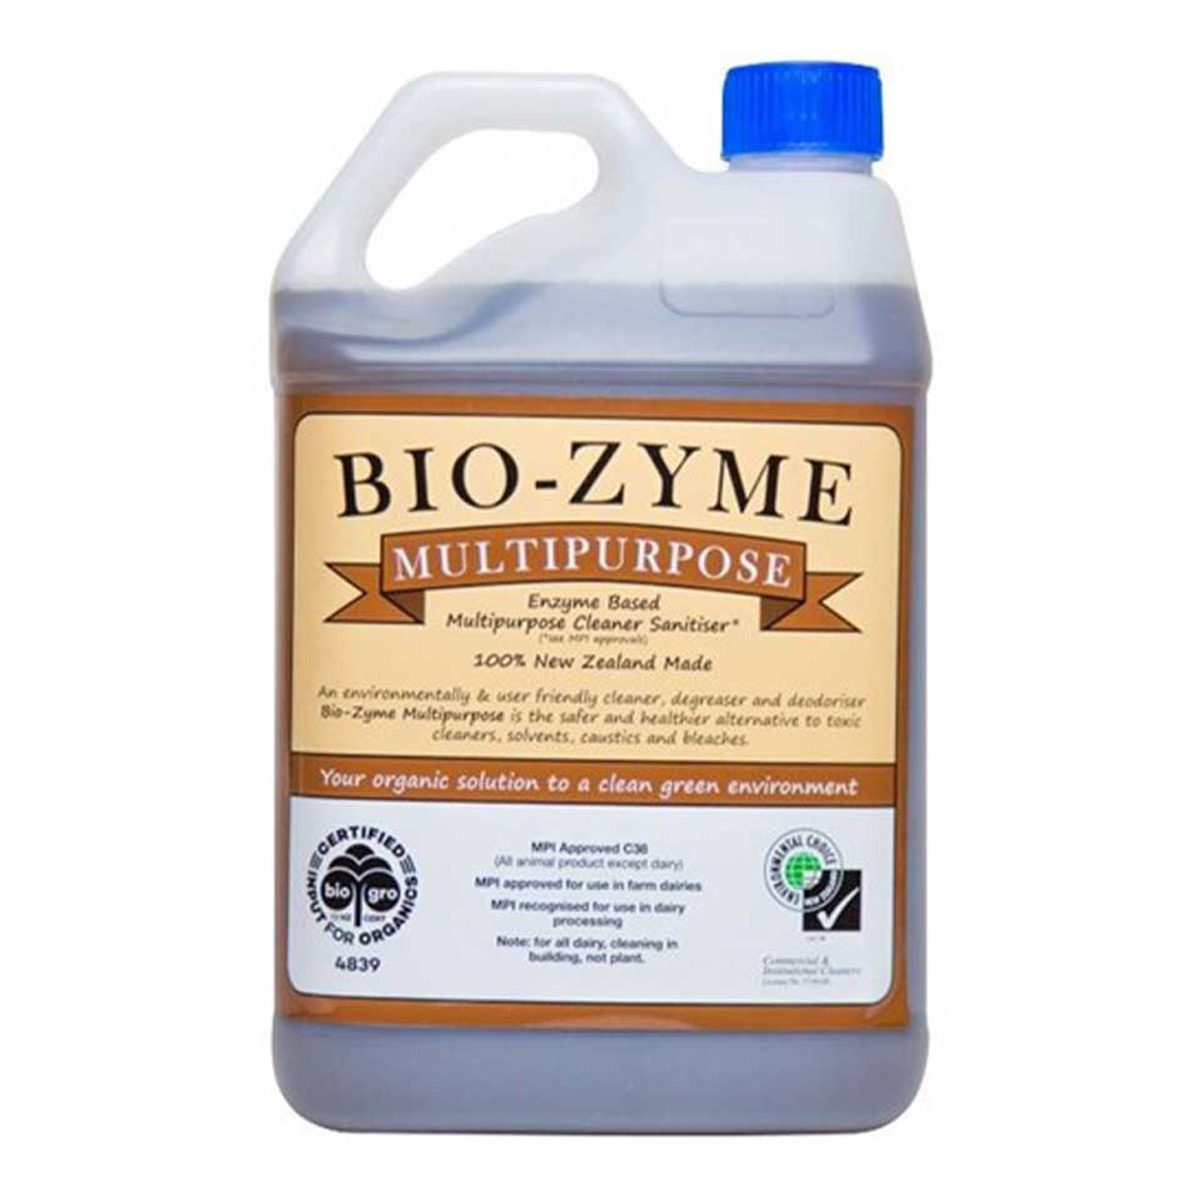 cleaning-products-environmental-bio-zyme-multipurpose-5L-litre-clean-floors-walls-benches-all-food-processing-equipment-neutralises-contaminants-as-biodegradable-cleaner-vjs-distributors-BZMULTI5L